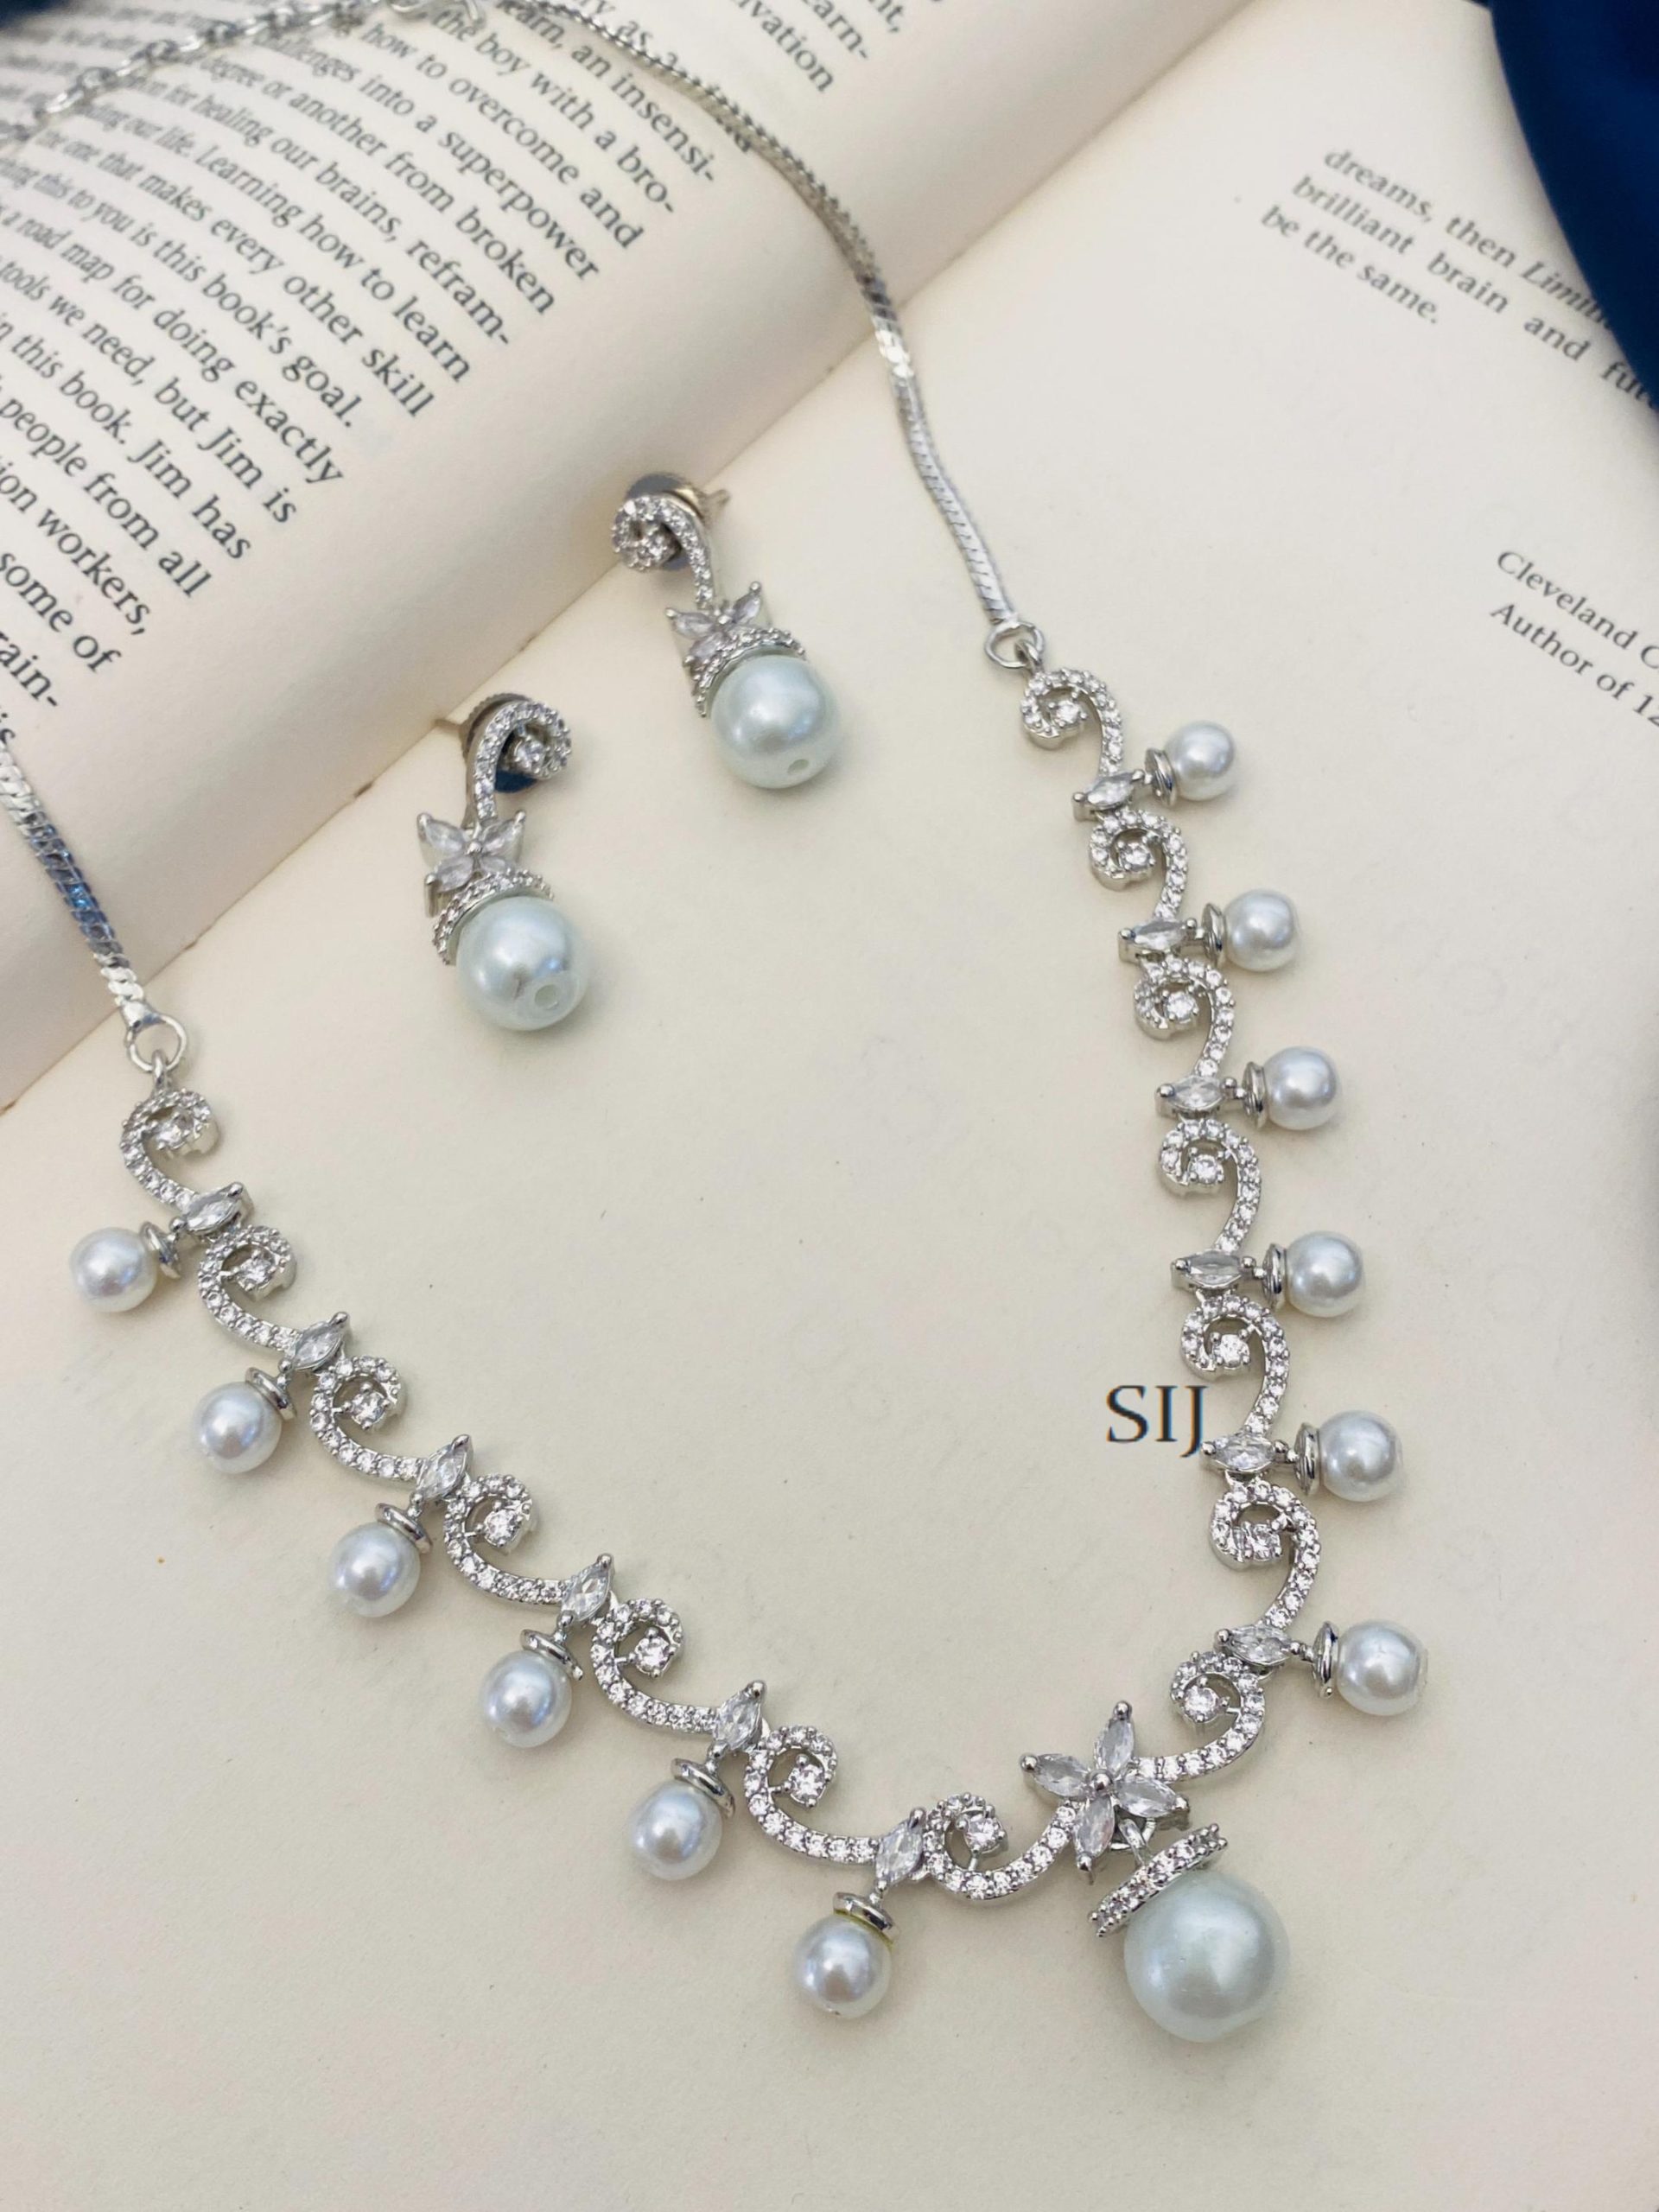 Imitation Silver Plated American Diamond Necklace